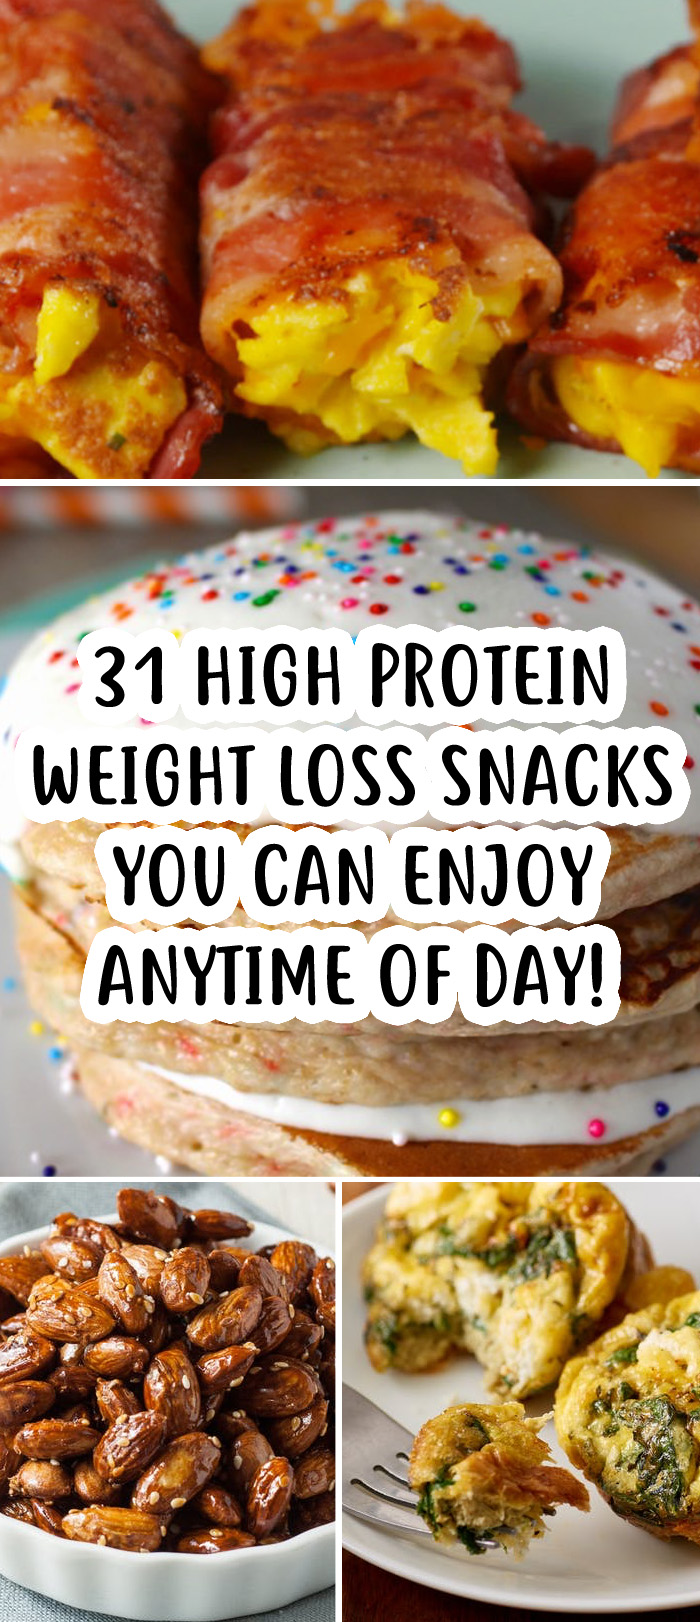 Protein Snacks For Weight Loss Weight Loss Shake Recipes Protein For